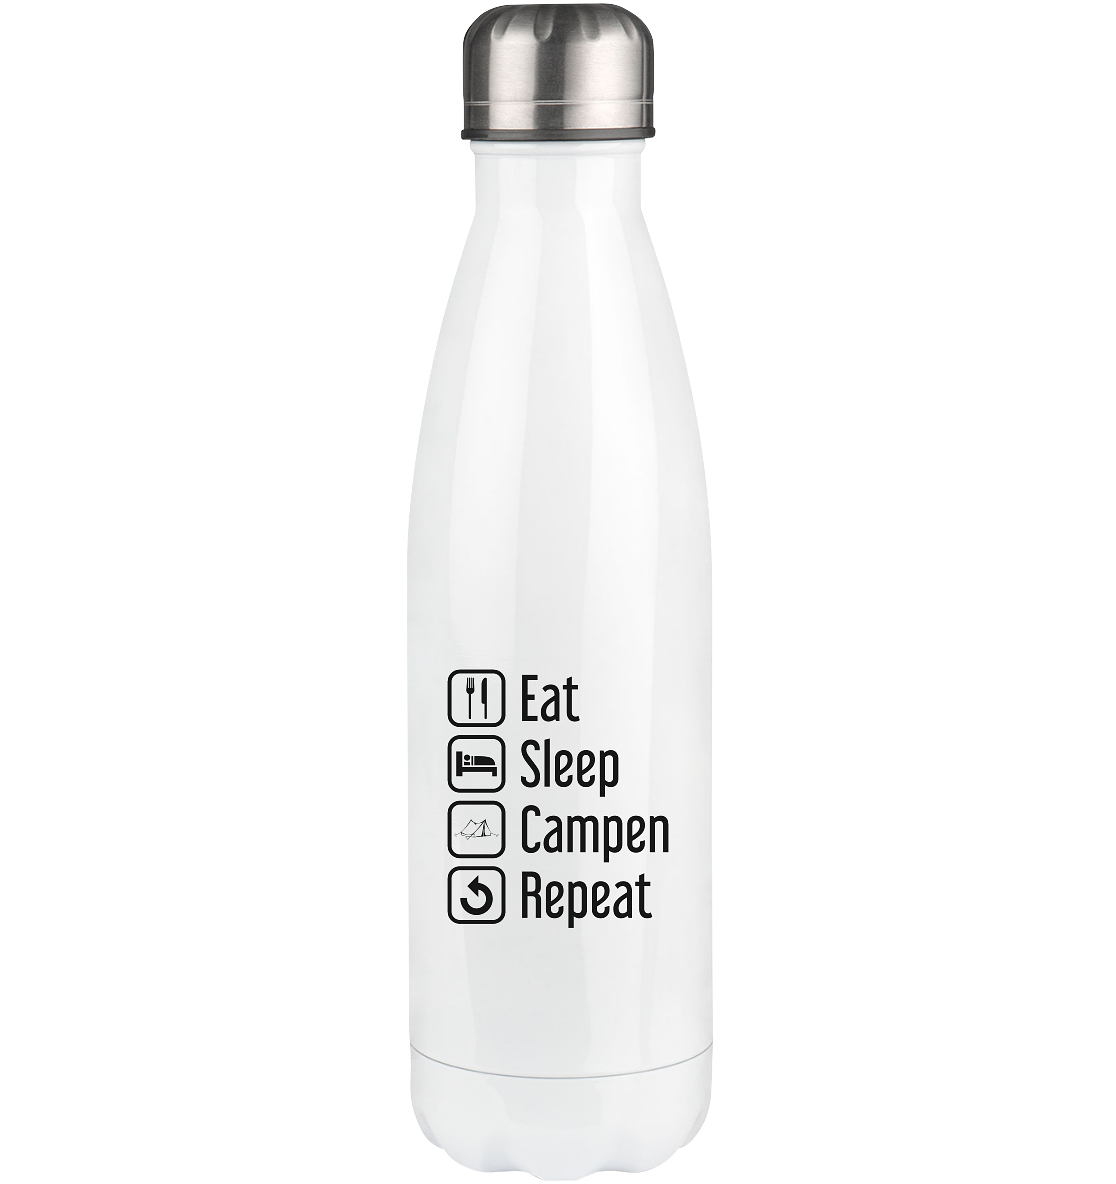 Eat Sleep Campen Repeat - Edelstahl Thermosflasche camping UONP 500ml